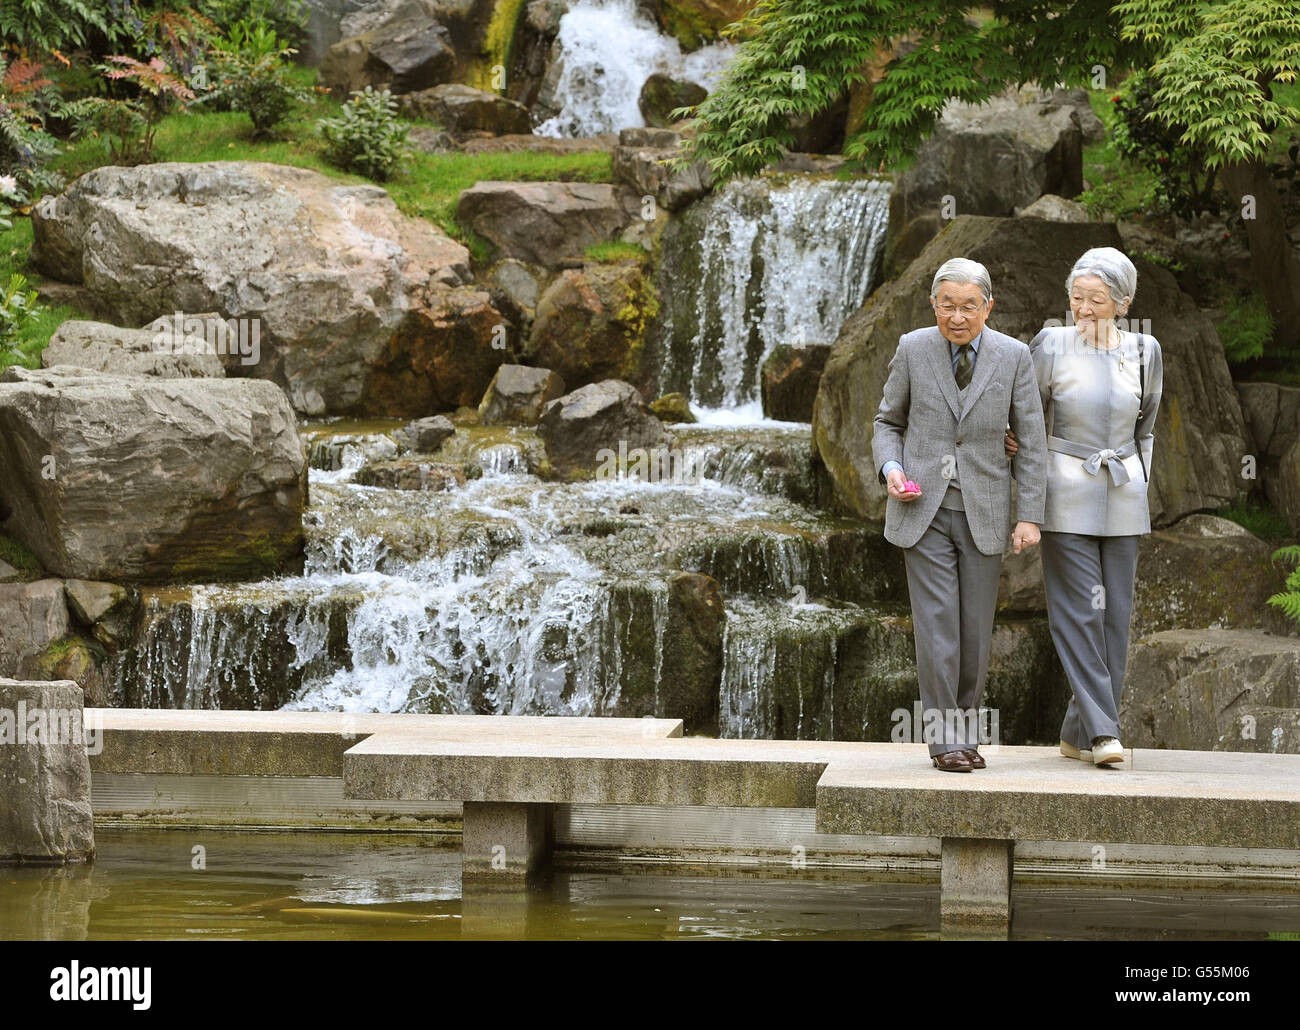 RETRANSMITTED CORRECTING EMPEROR'S NAME The Emperor and Empress of Japan Akihito and Michiko walk across a concrete bridge, as they tour the Kyoto Japanese Garden, in Holland Park West London. Stock Photo